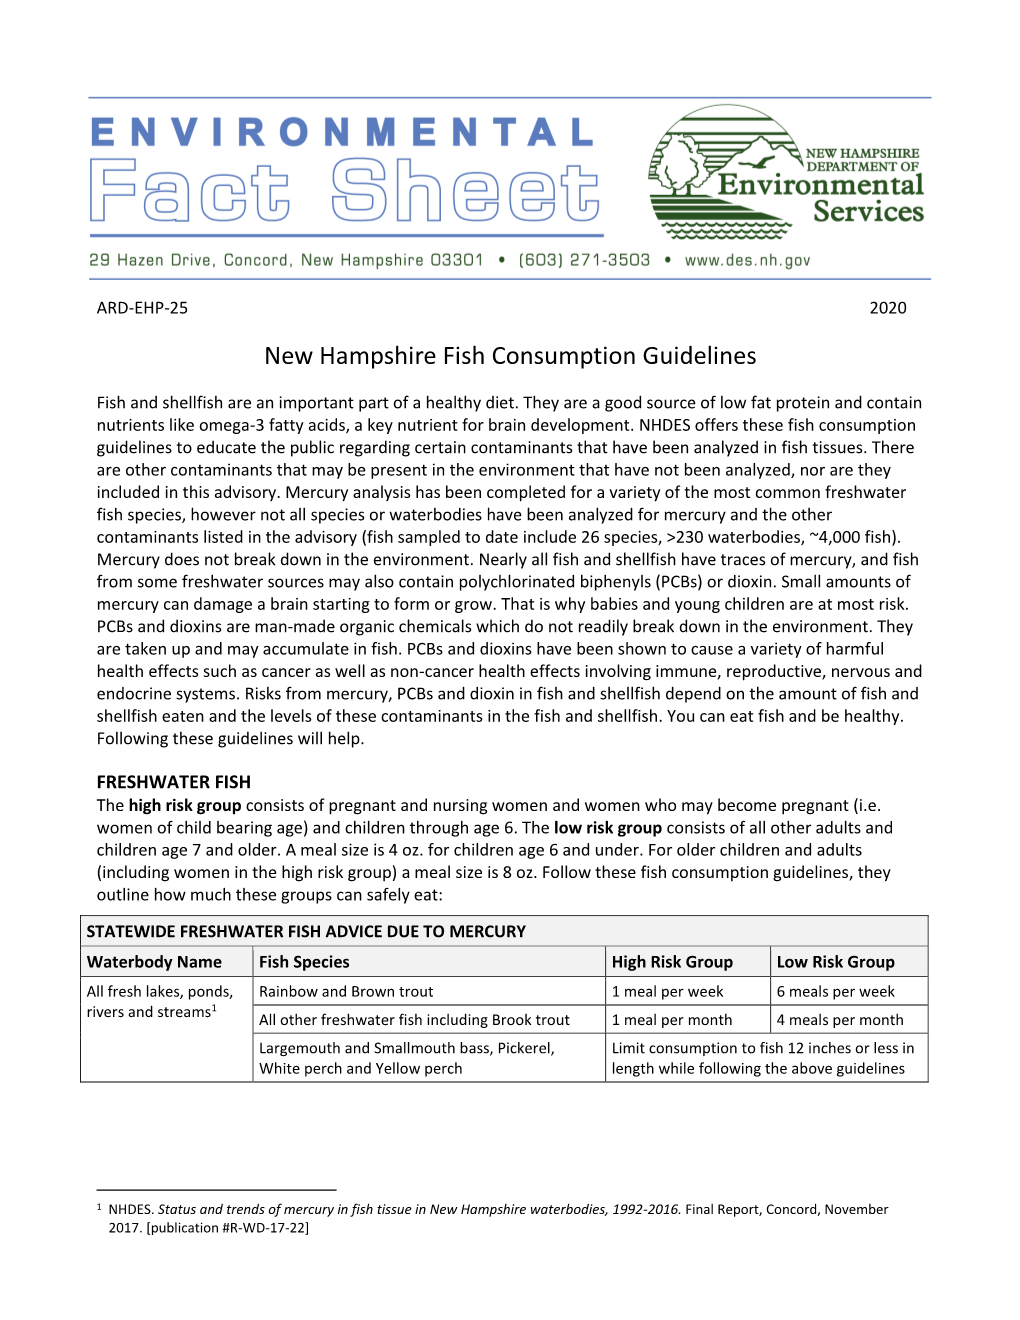 New Hampshire Fish Consumption Guidelines